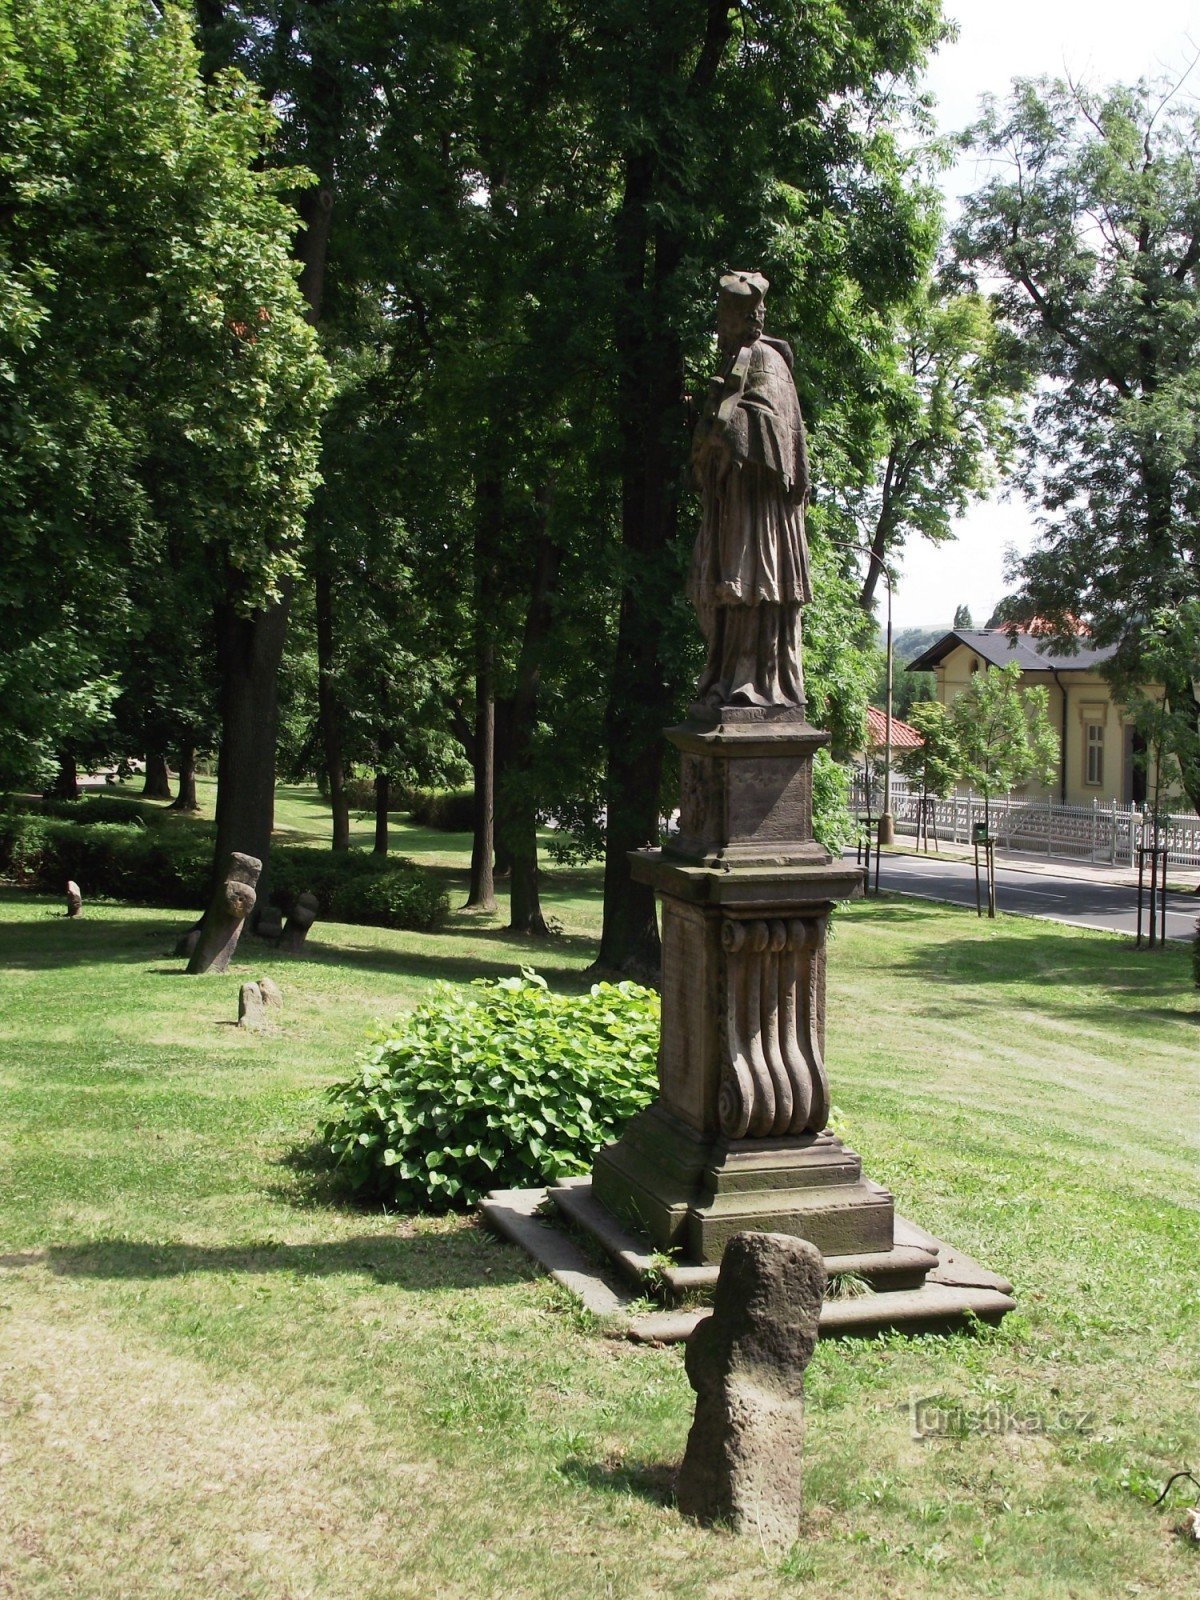 Kadaň - Stations of the Cross and Reconciliation Crosses